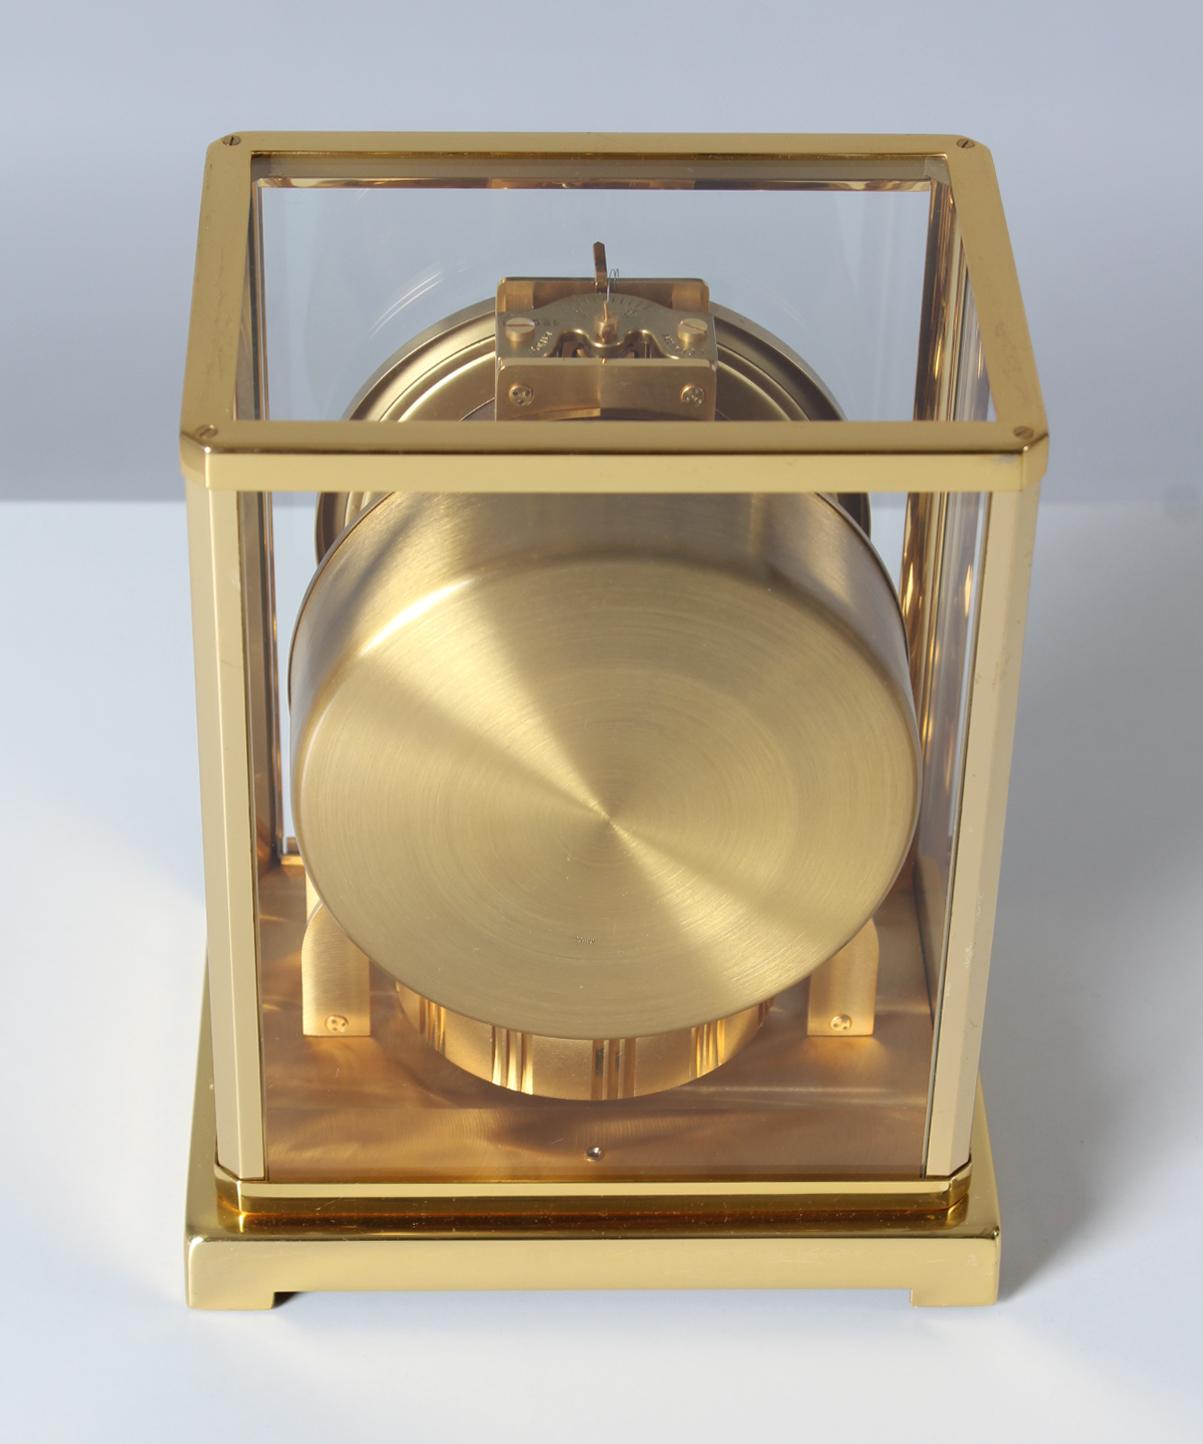 Brass Jaeger LeCoultre, Atmos Table Clock from 1974, Fullset with Box and Papers